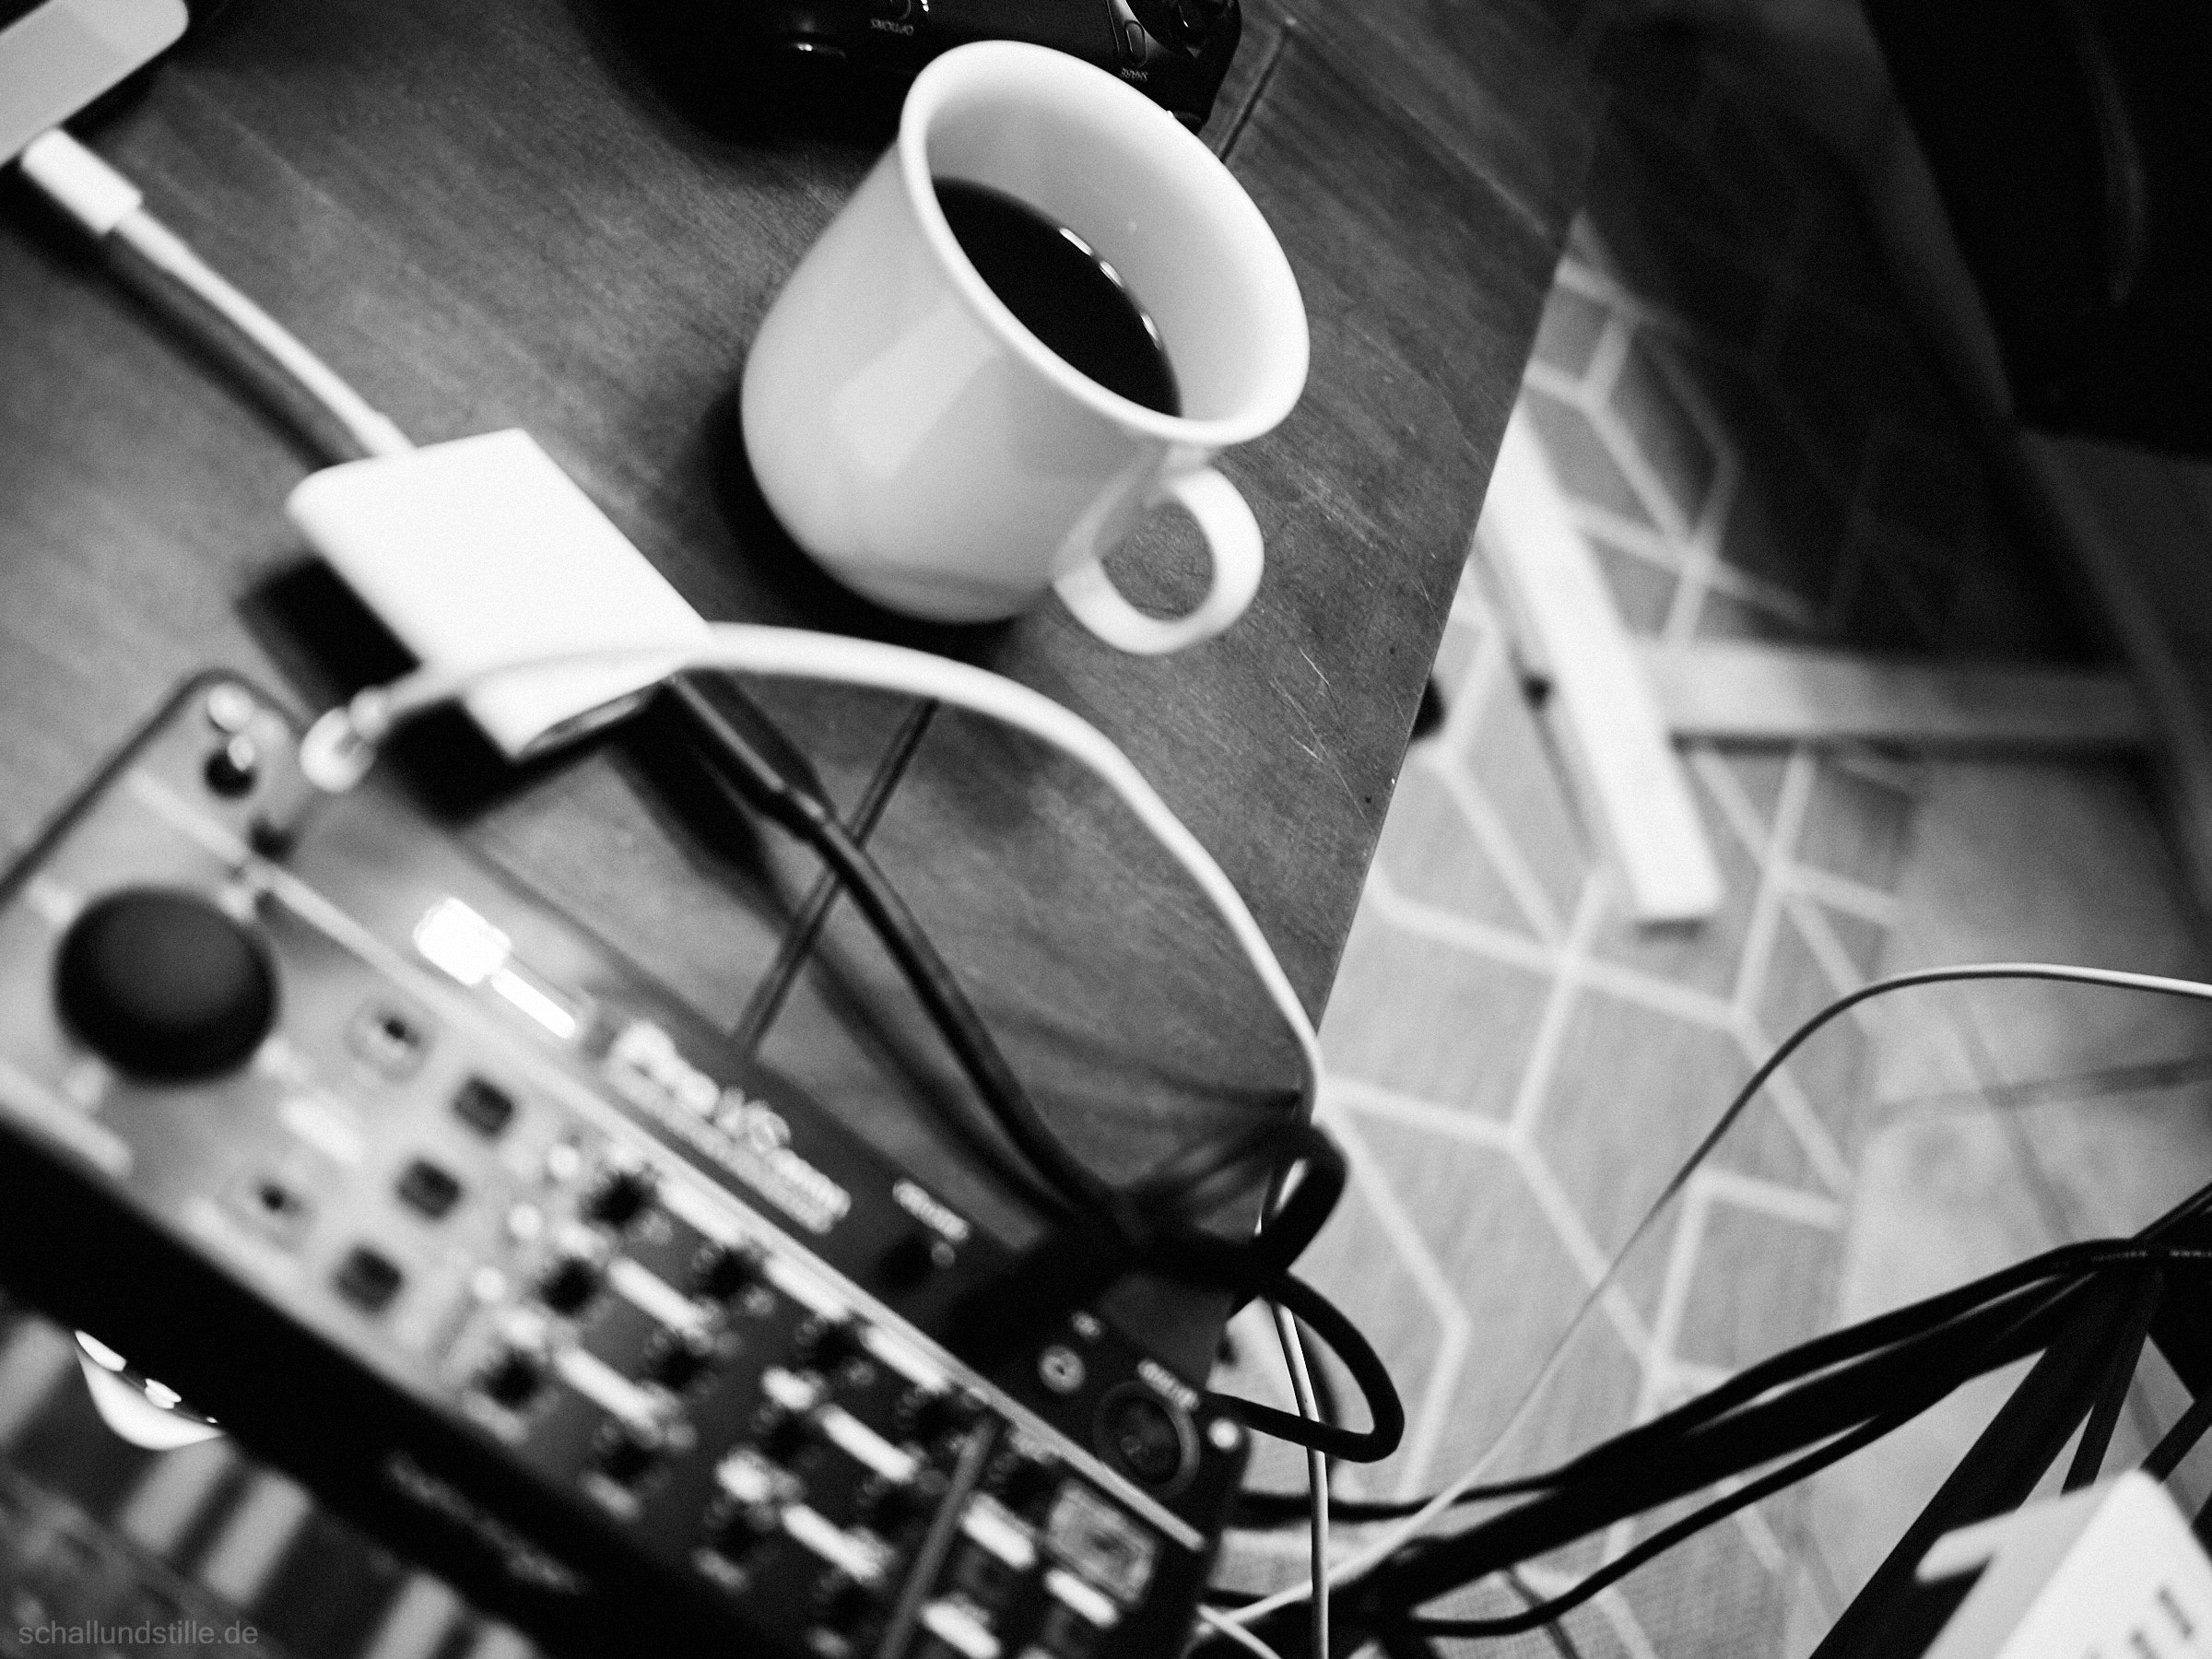 black and white picture of a Behringer Pro VS Mini synthesizer (unsharp) in the foreground and a cup of coffee in the background